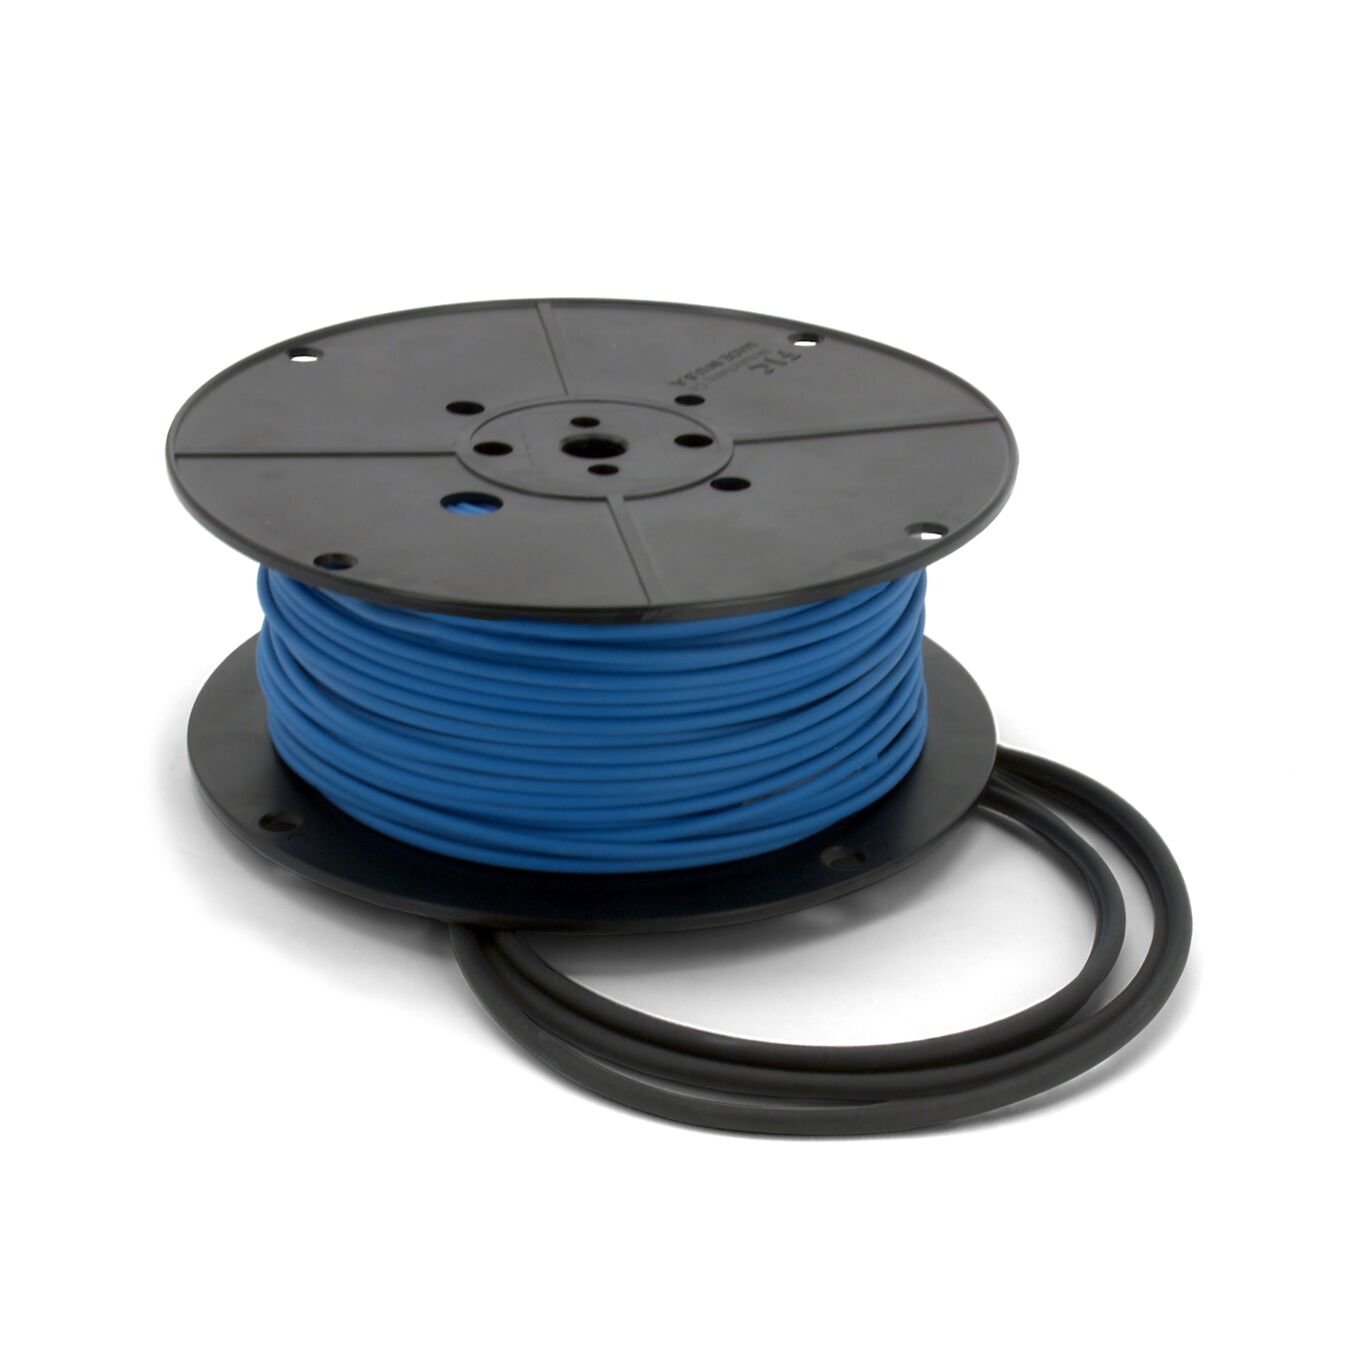 120V Floor Heating Cable - Covers from 33 up to 41 sf depending on chosen  spacing